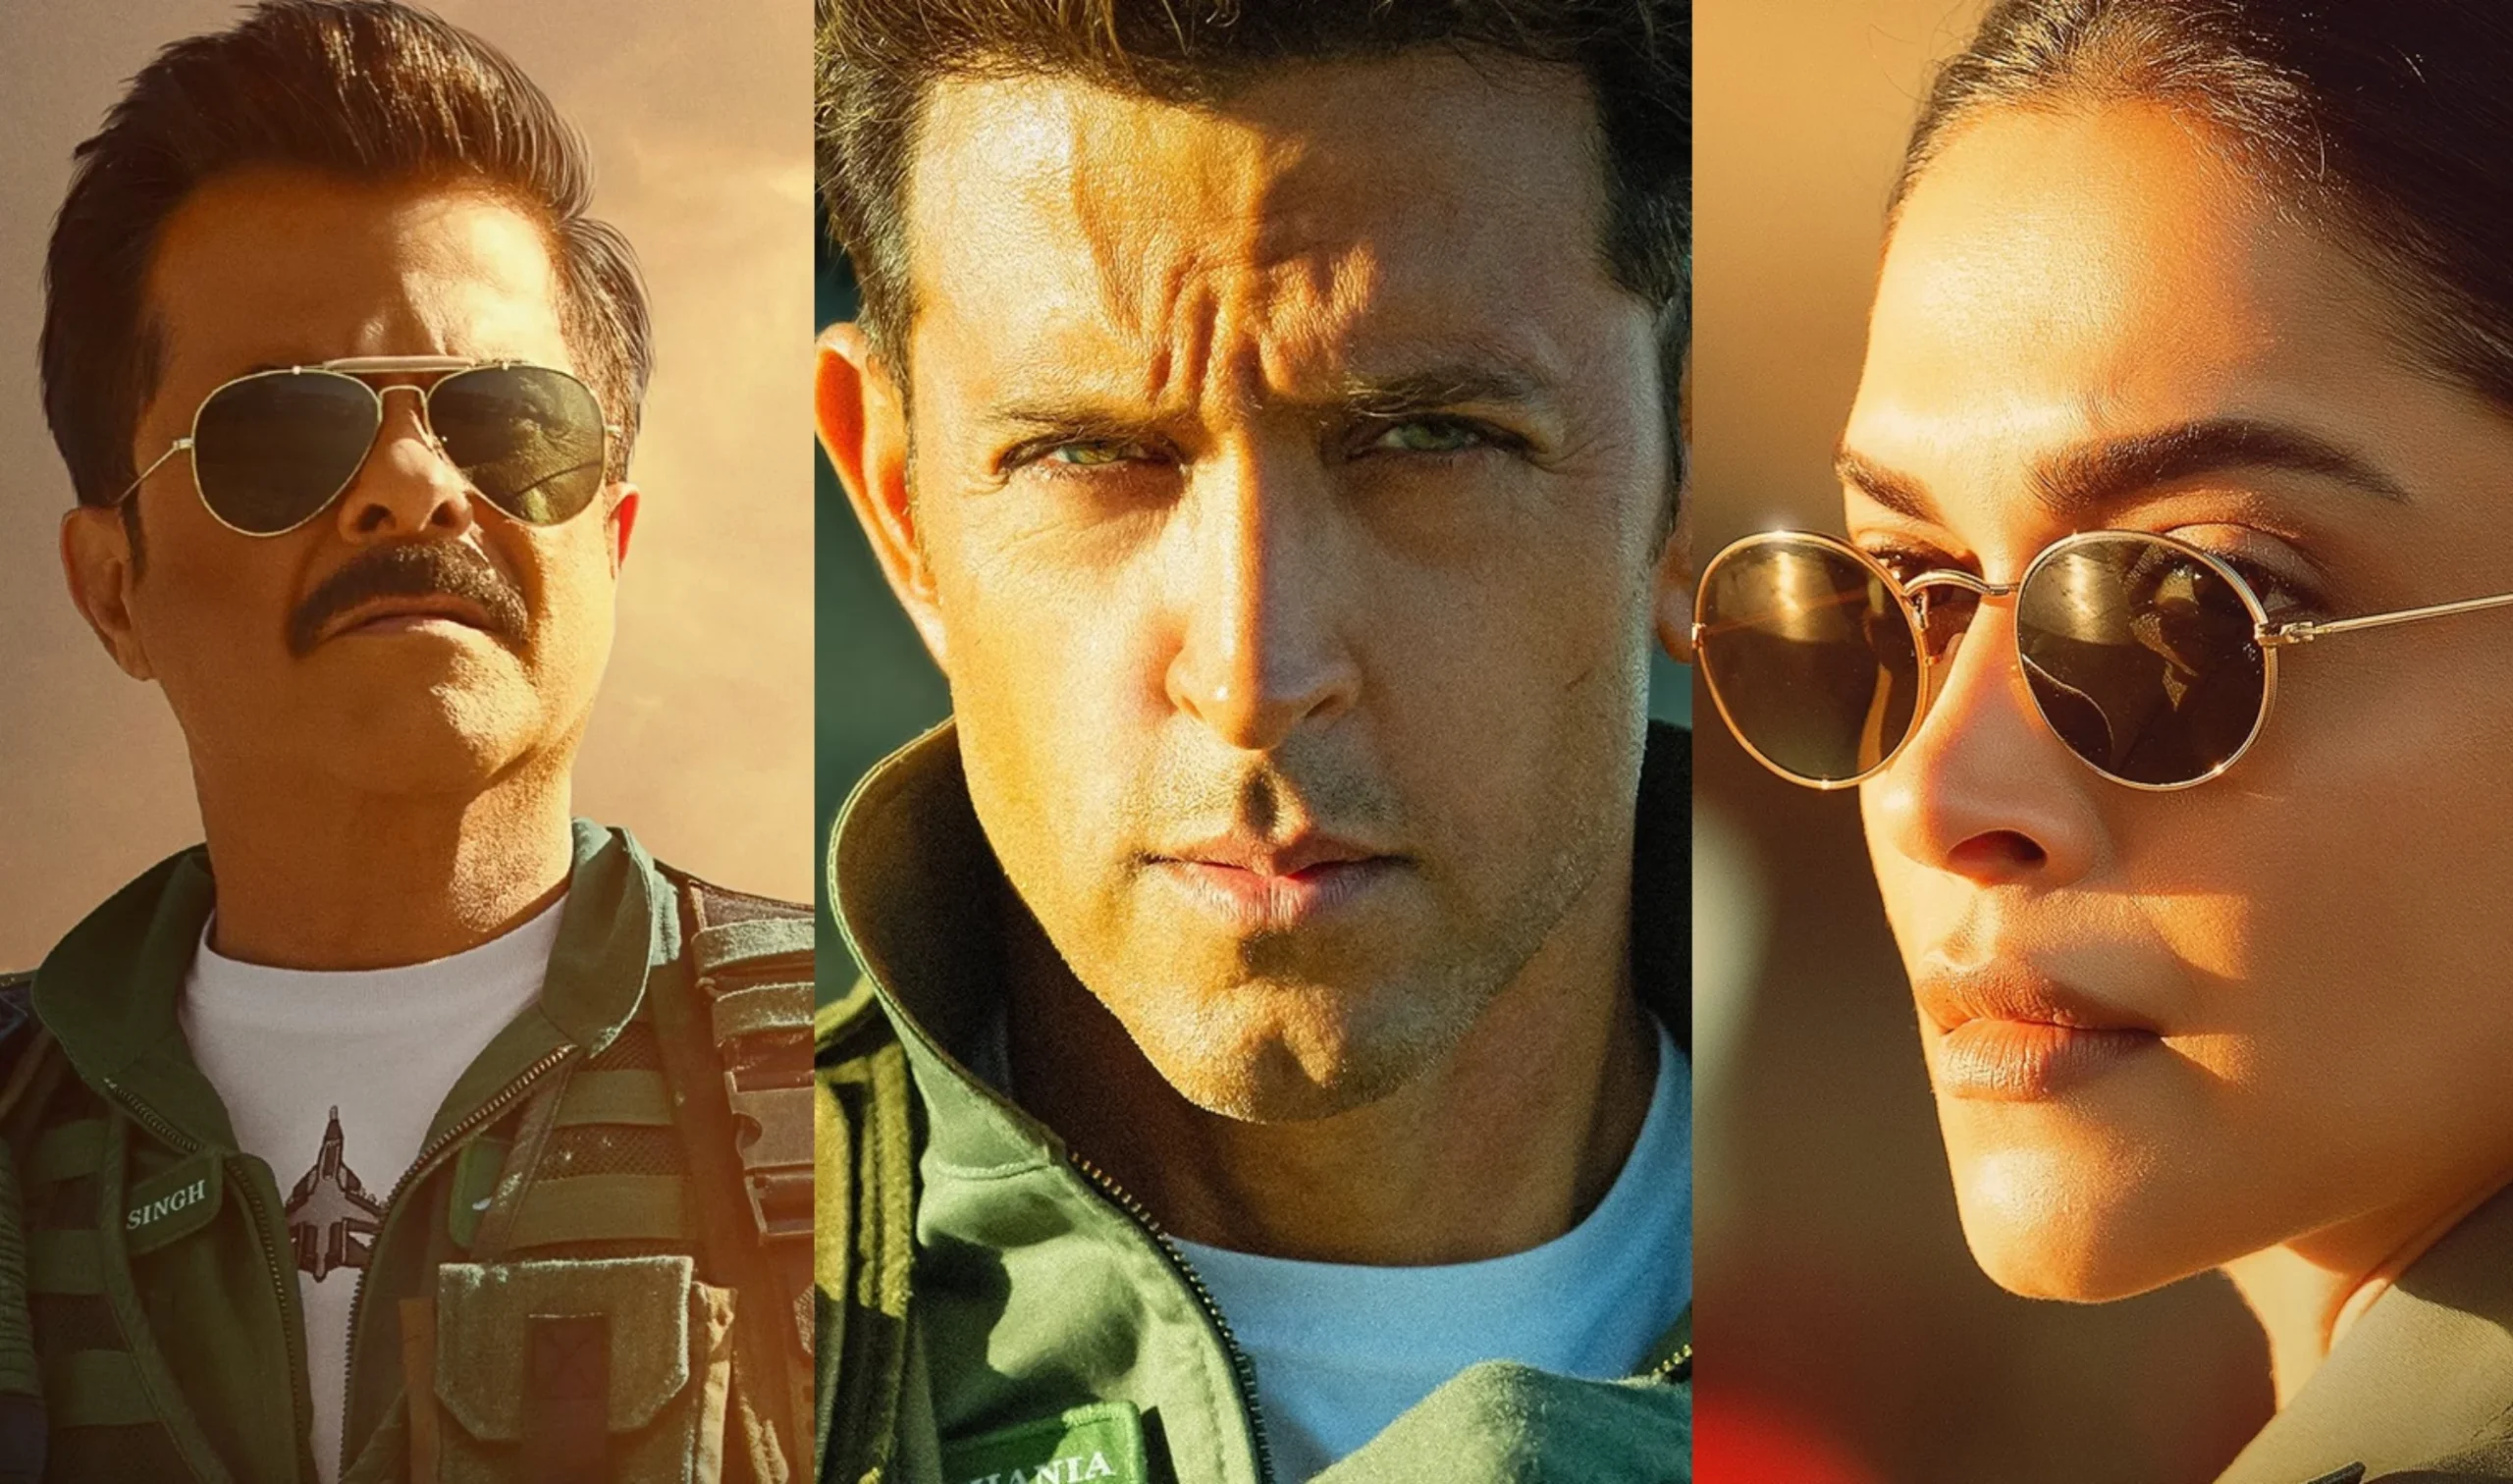 Fighter Movie Review: Once Again, Siddharth Anand and Hrithik Roshan Spared the Charm in Theater